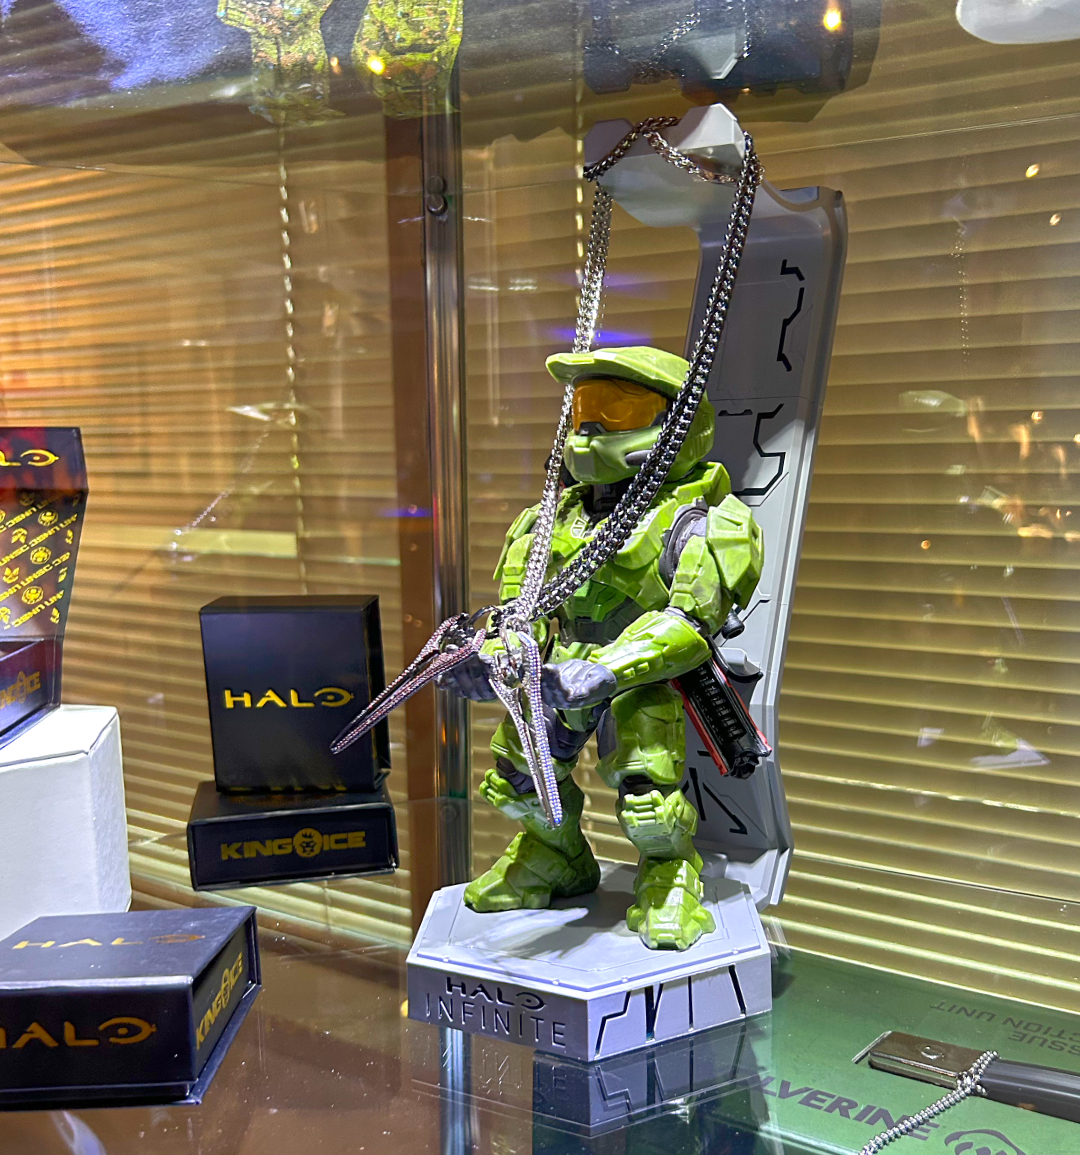 Halo King Ice collaboration on a Master Chief statue